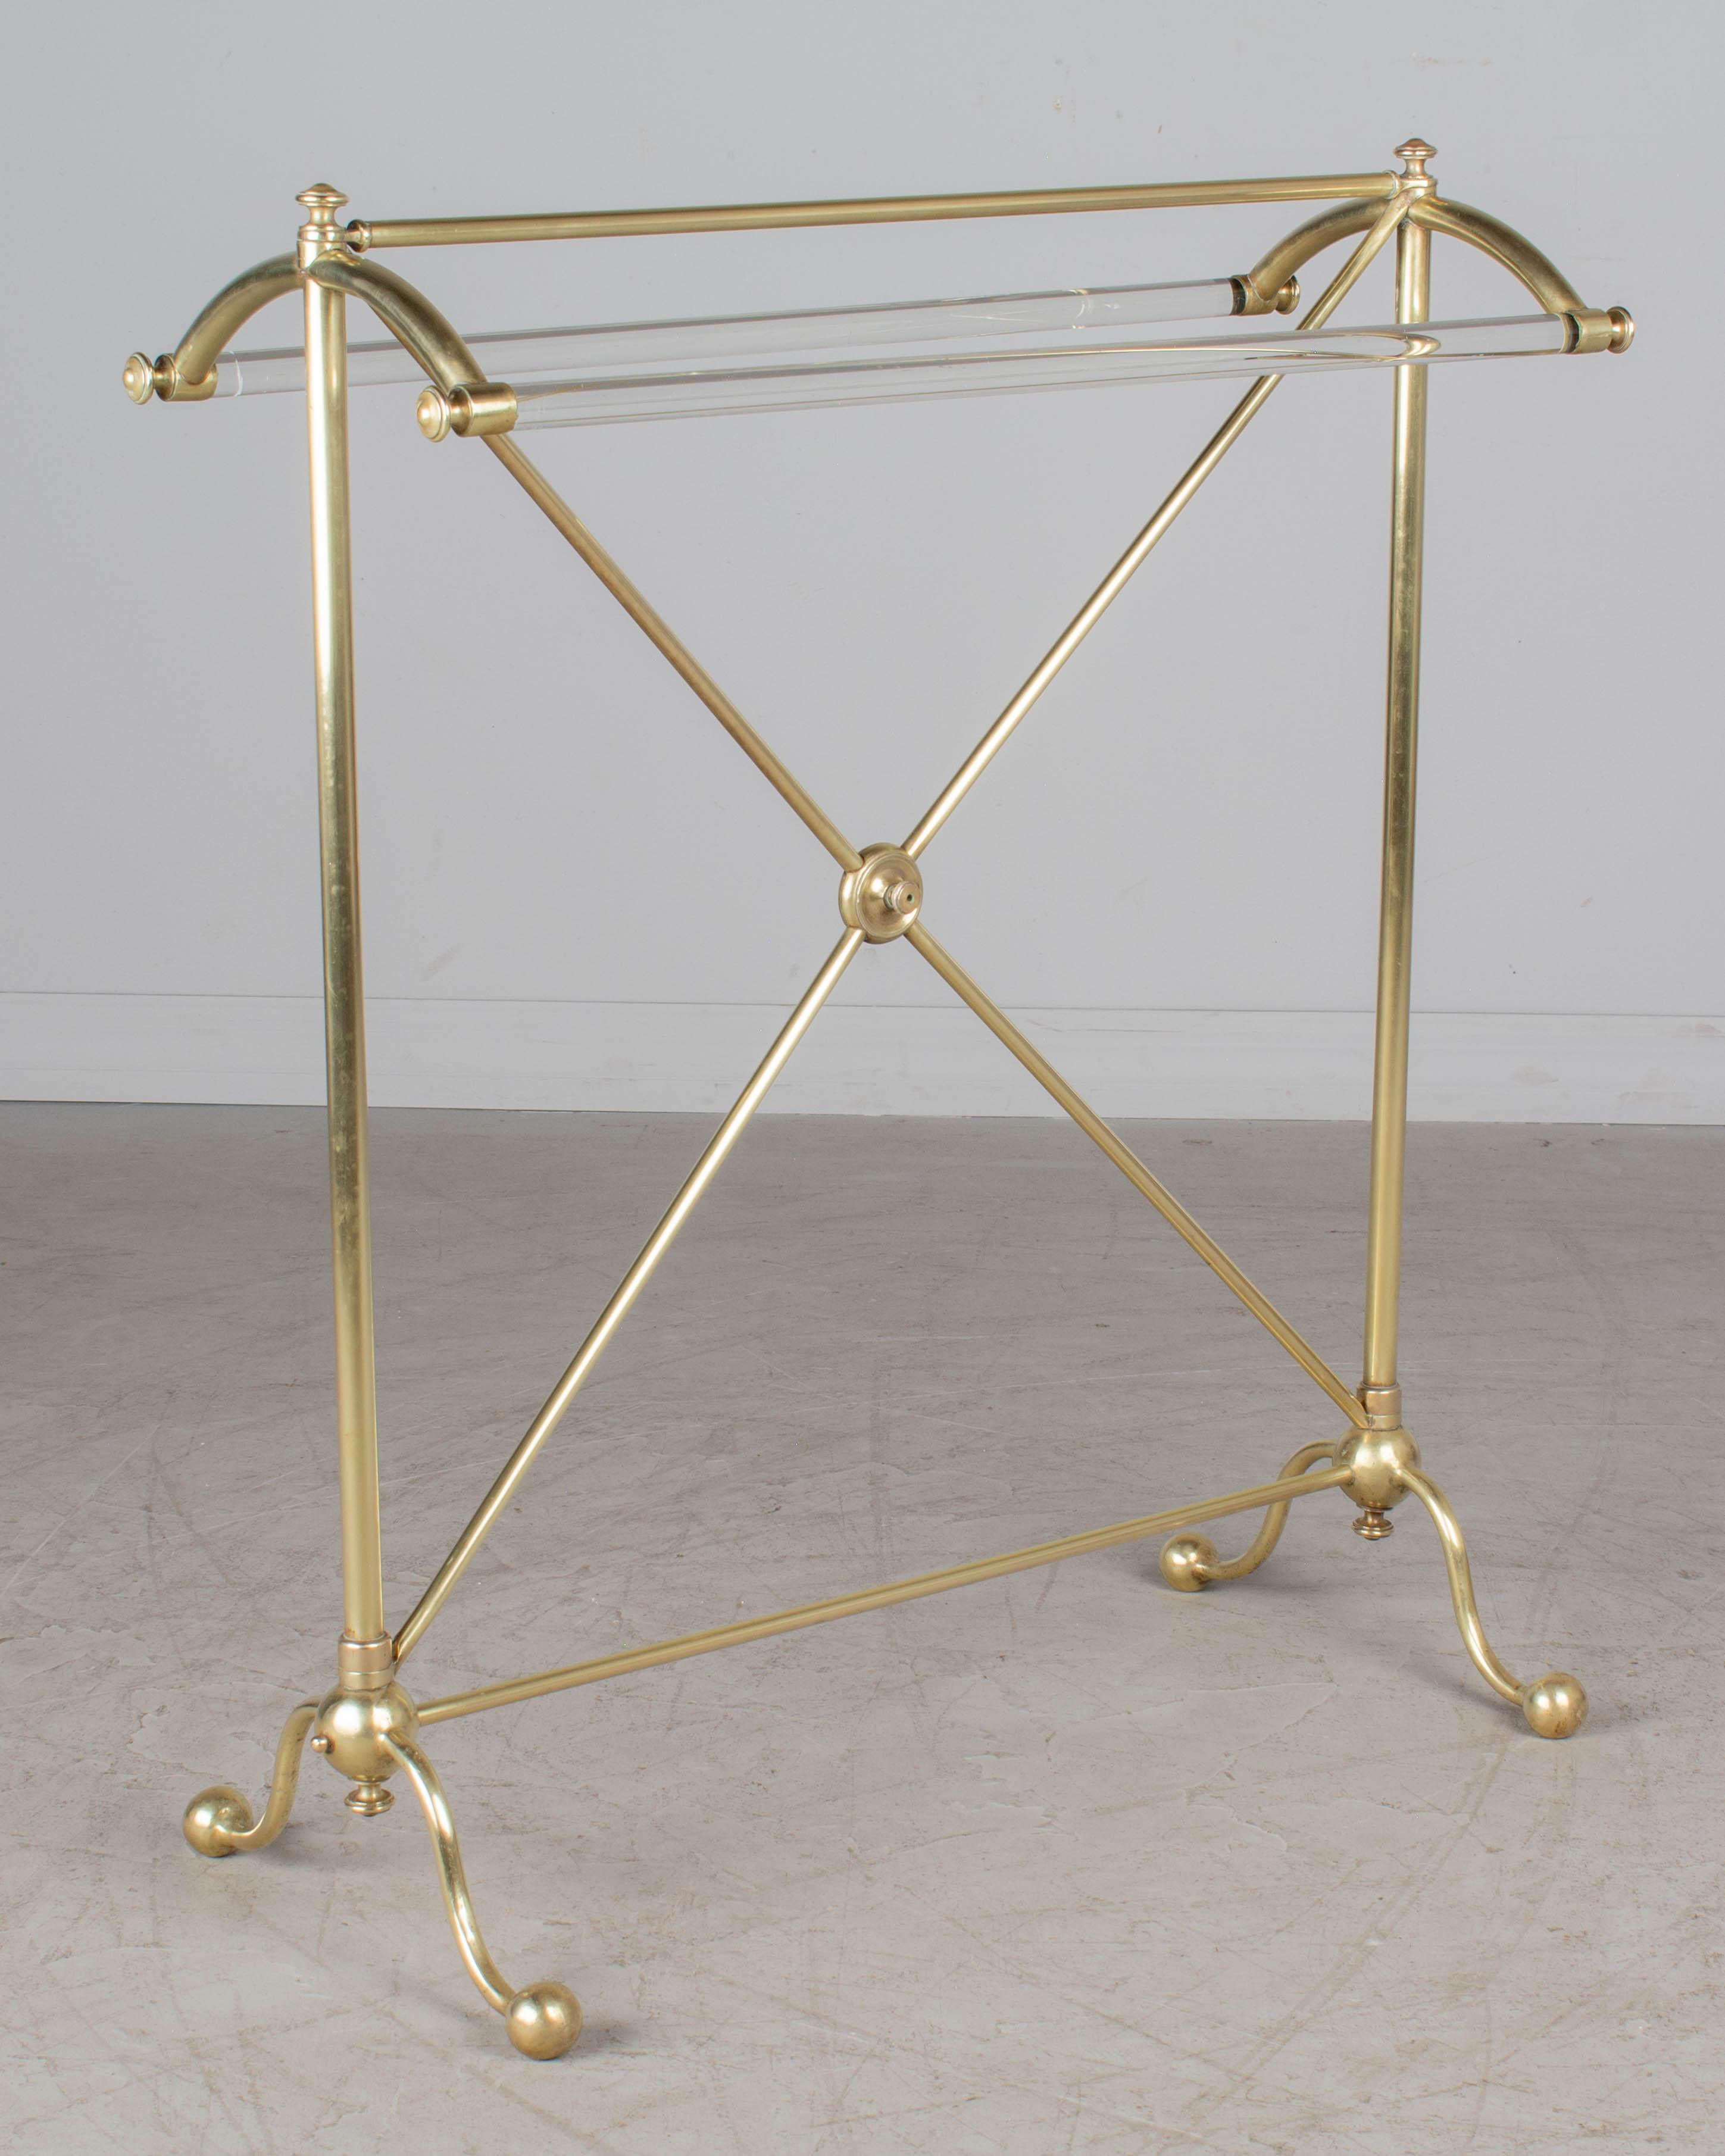 A late 19th century French freestanding brass towel rack or rail with double glass bars. Sturdy with x-frame and cast brass ball feet, finials and center detail. In good condition, polished but not lacquered. Circa 1880-1900. 32